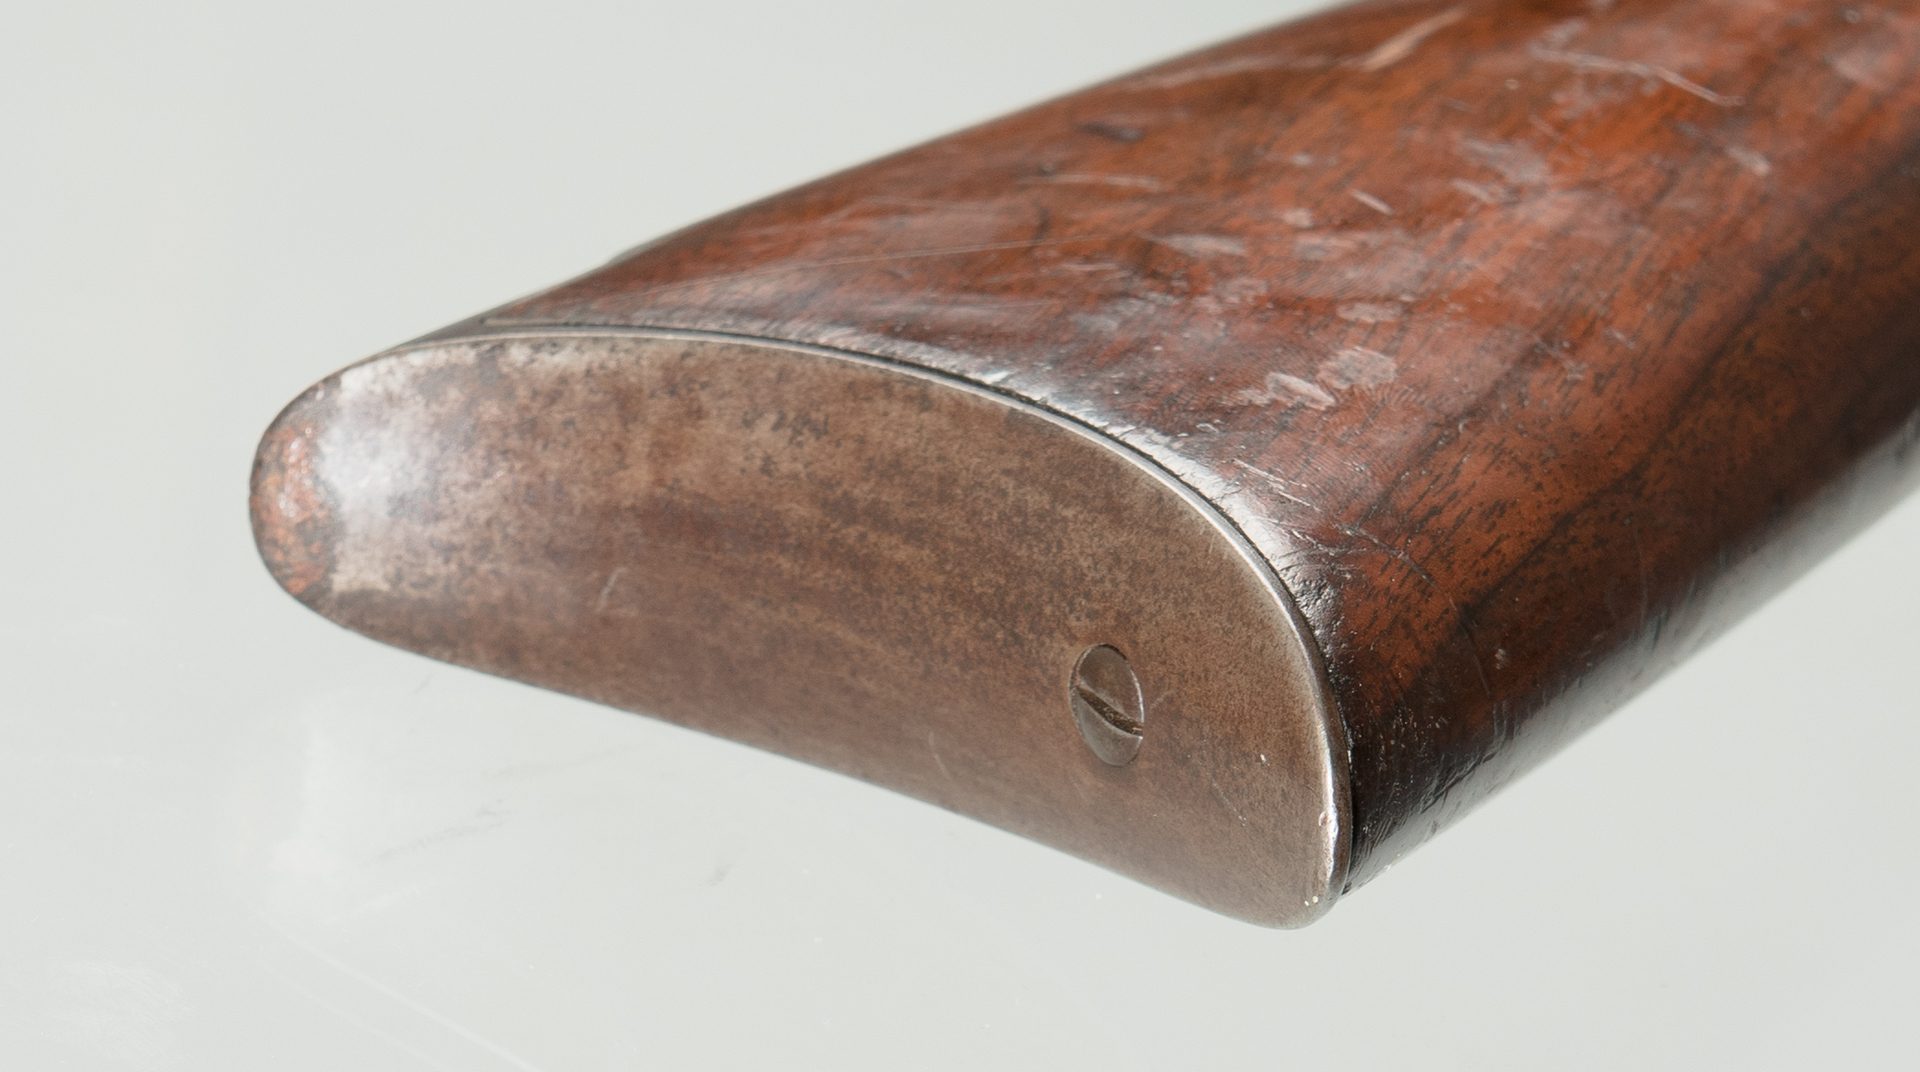 Lot 799: Winchester Model 1892, 32 WCF Action Rifle